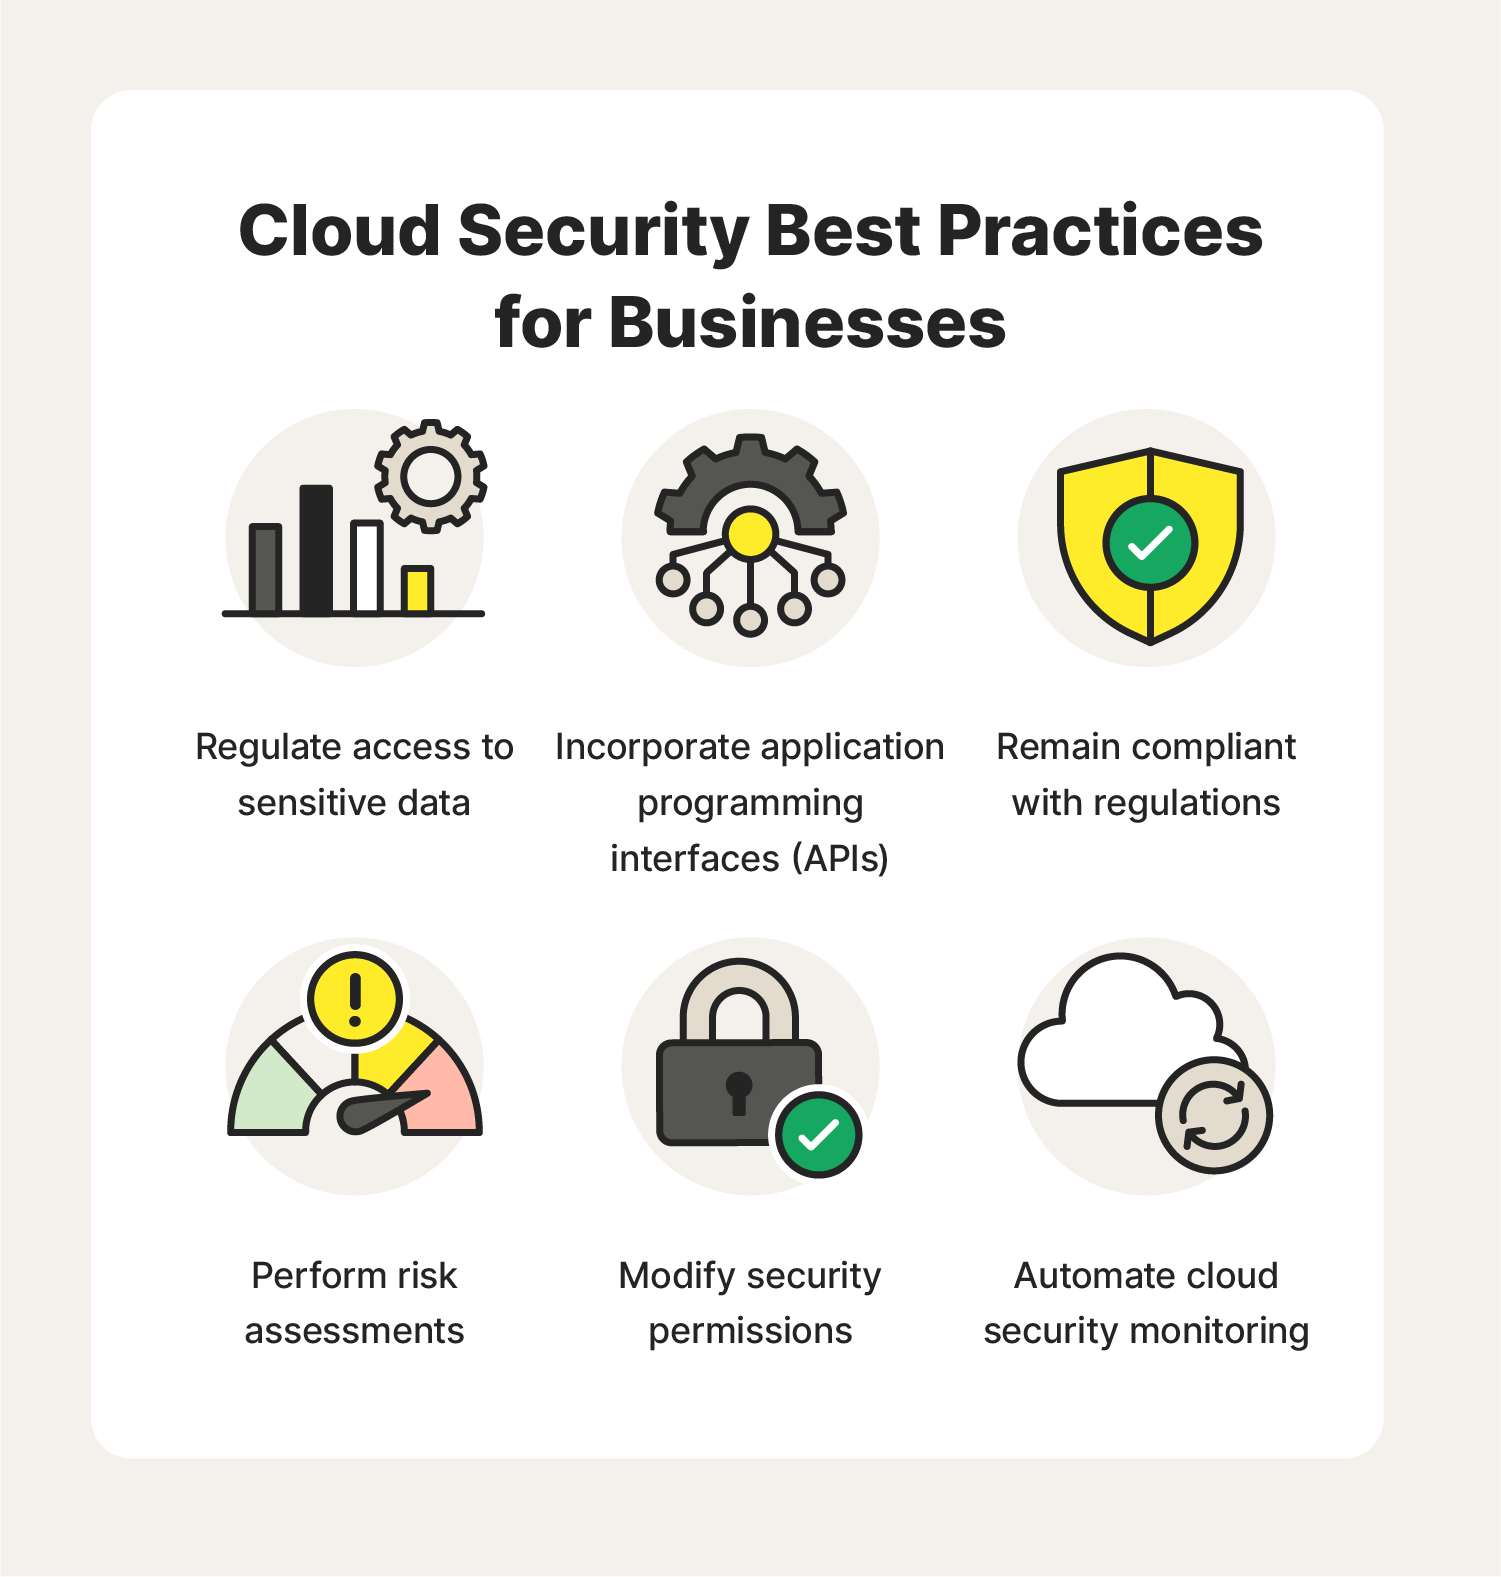 A graphic discussing cloud security best practices for businesses